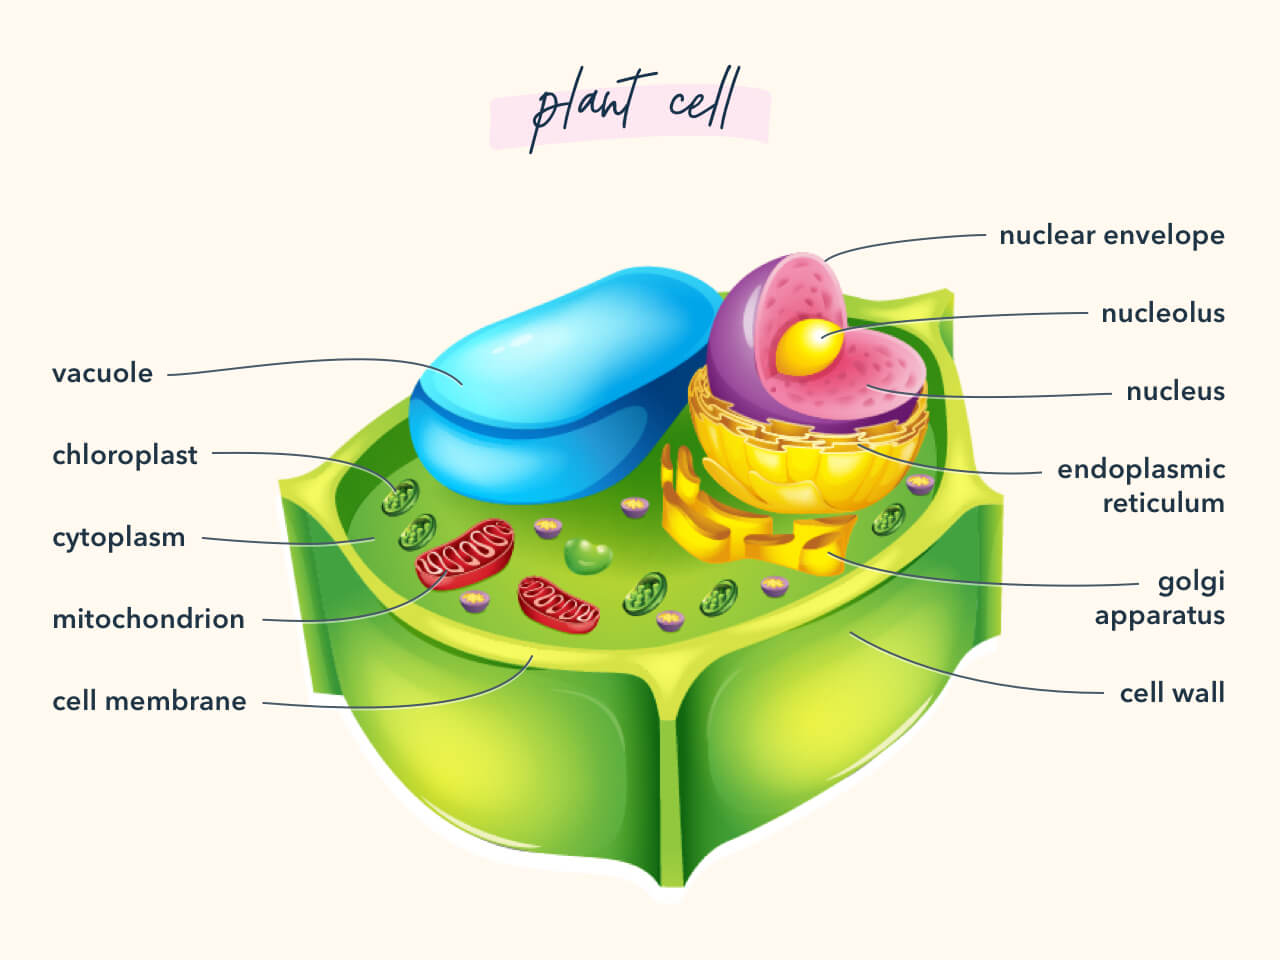 Diagram showing the components of a plan cell.